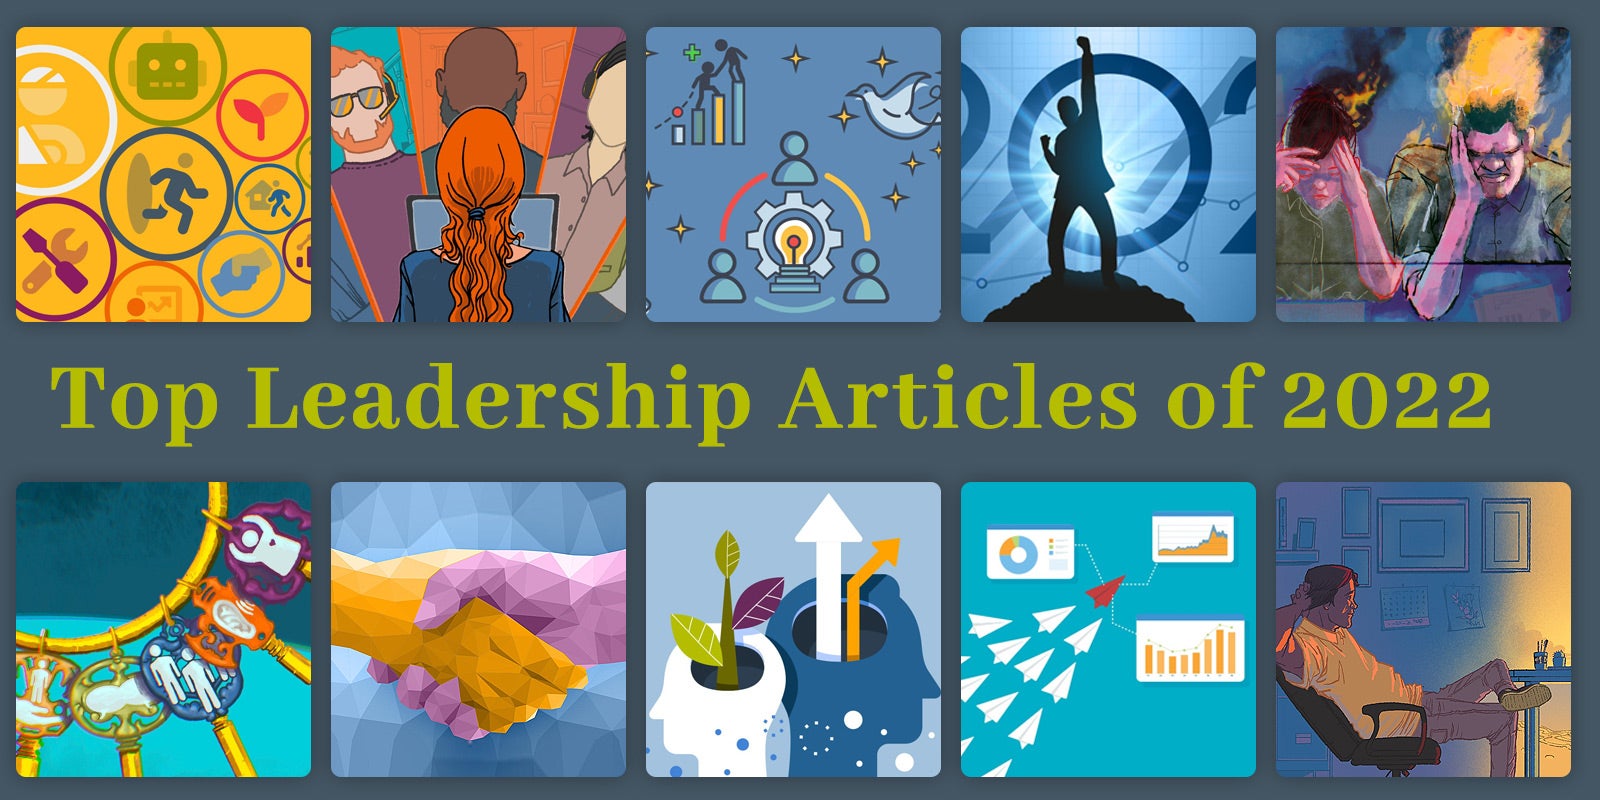 image that says top leadership articles of 2022 surrounded by 10 small images representing each one of the top-10 leadership articles of 2022 we outline in this blog